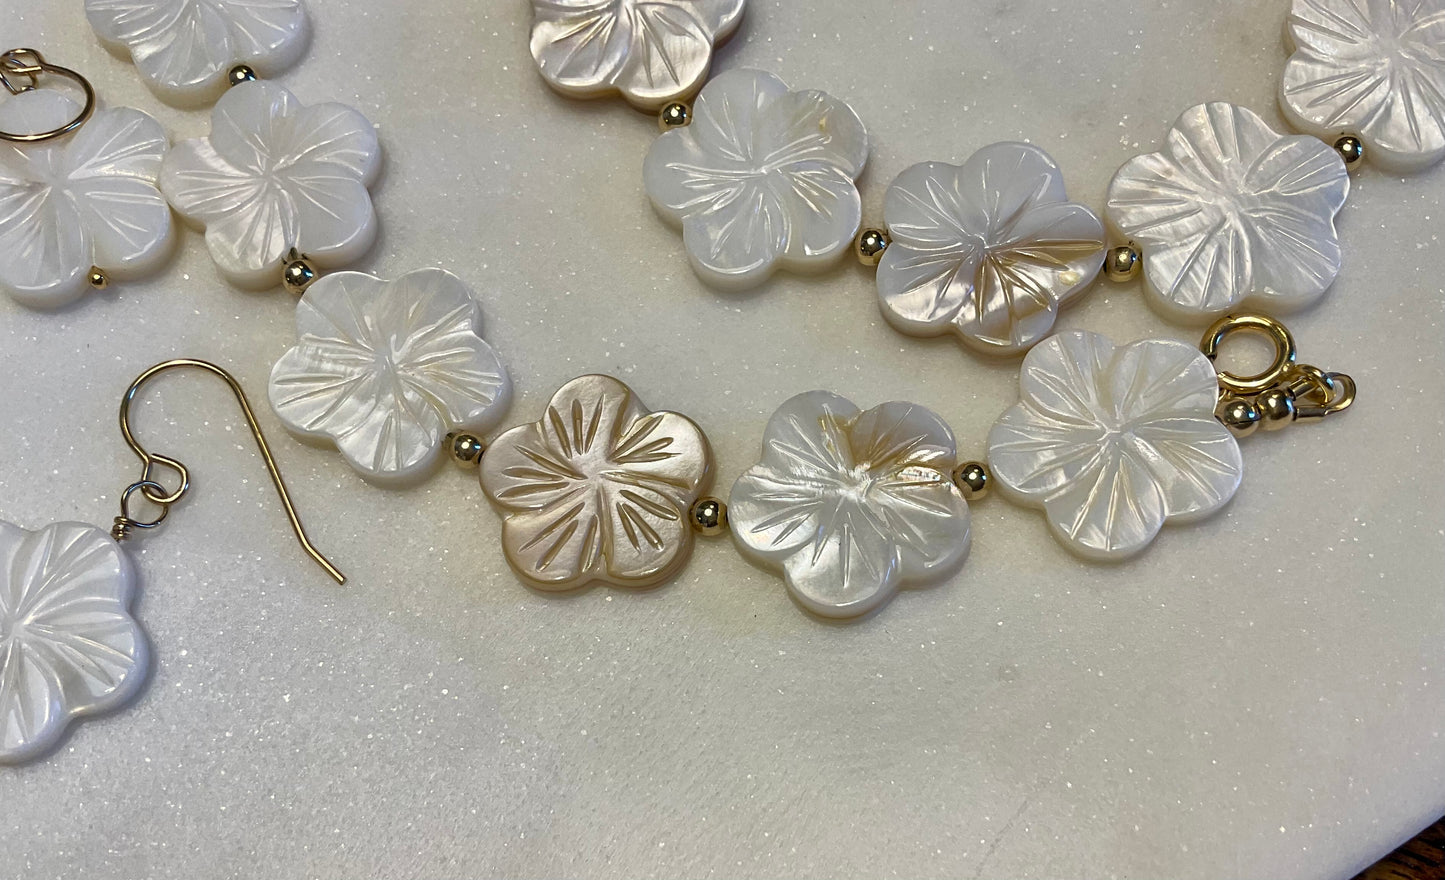 Mother of Pearl Carved Flower Necklace & Earrings Set